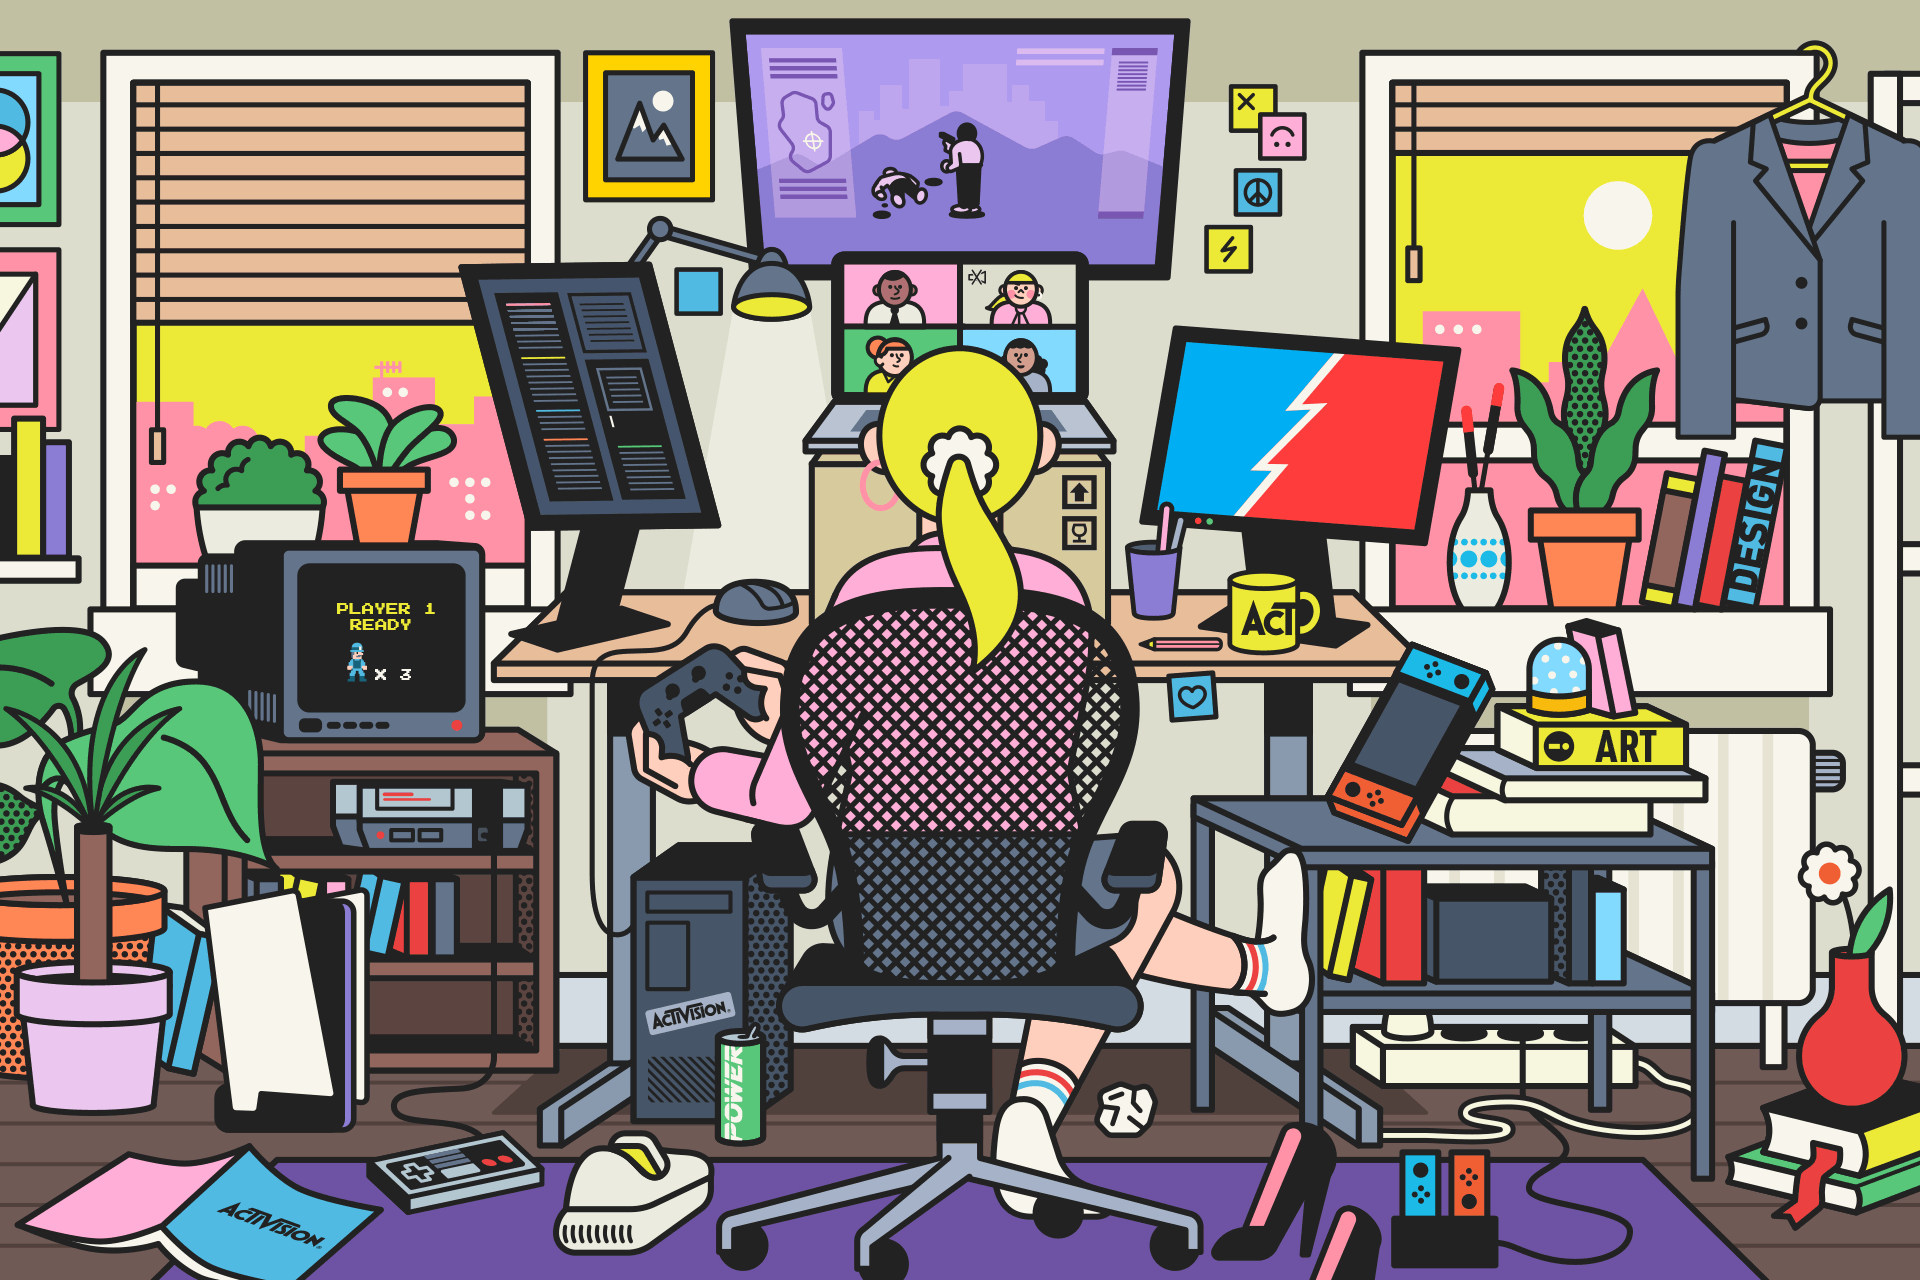 Are gamers gaming during their workday? - by John DeVore